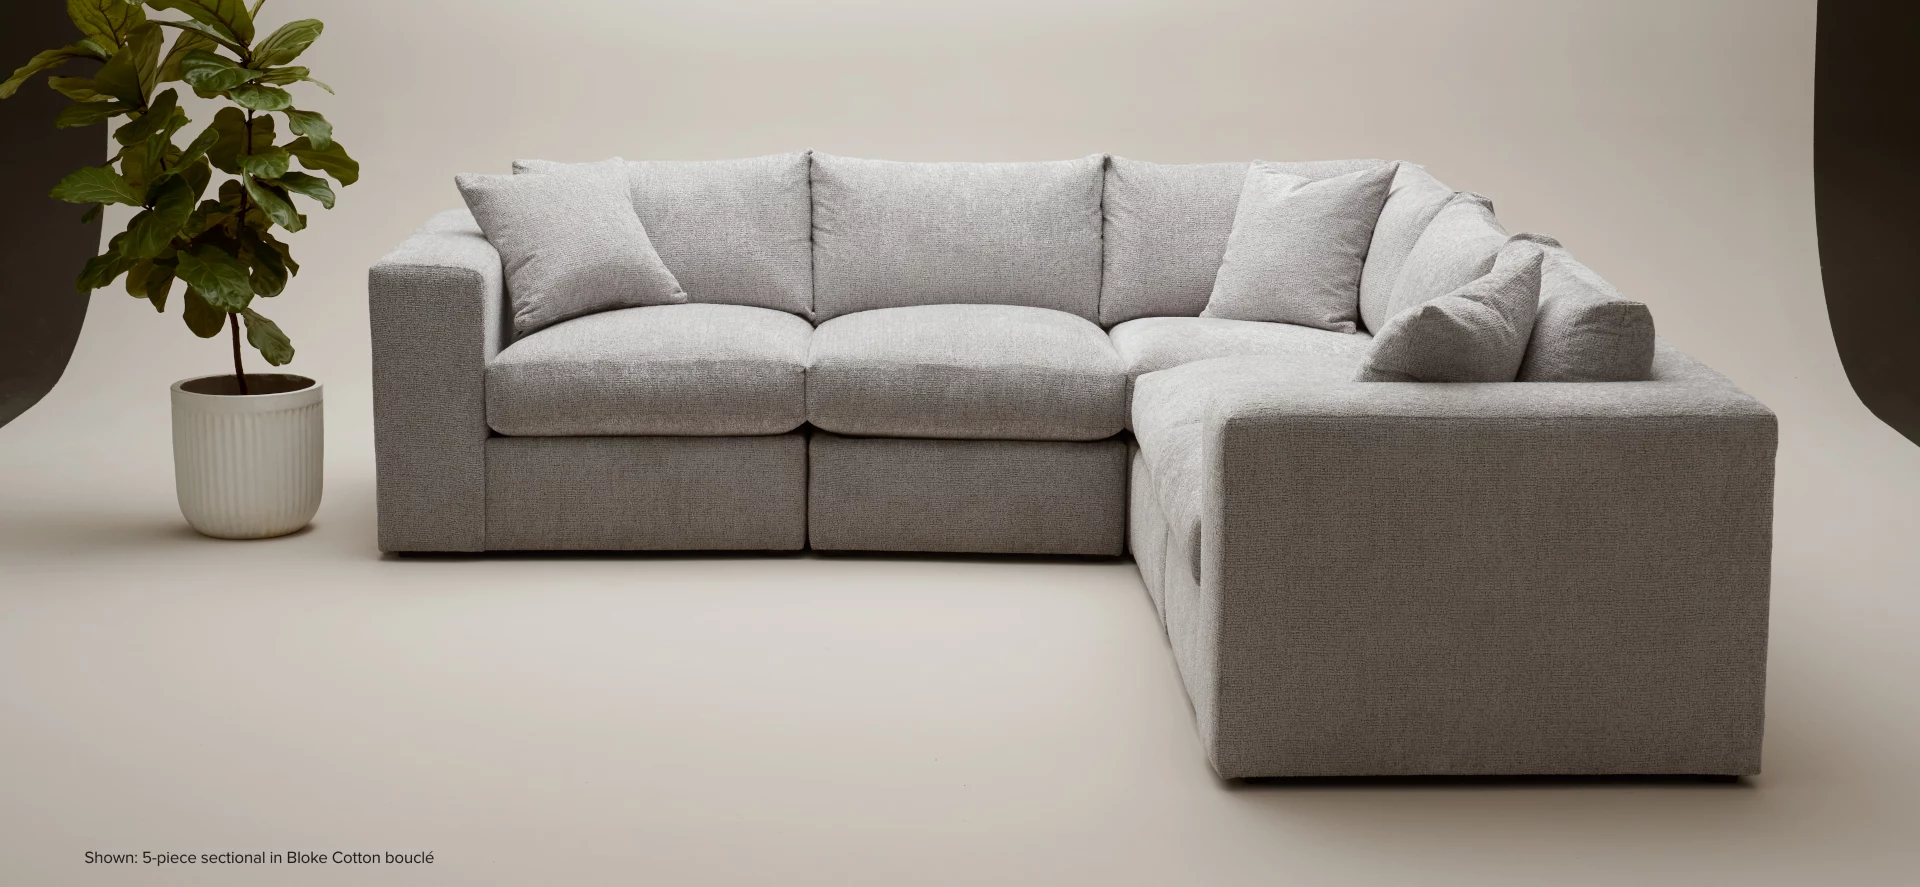 Collin 5-piece sectional in bloke cotton boucle